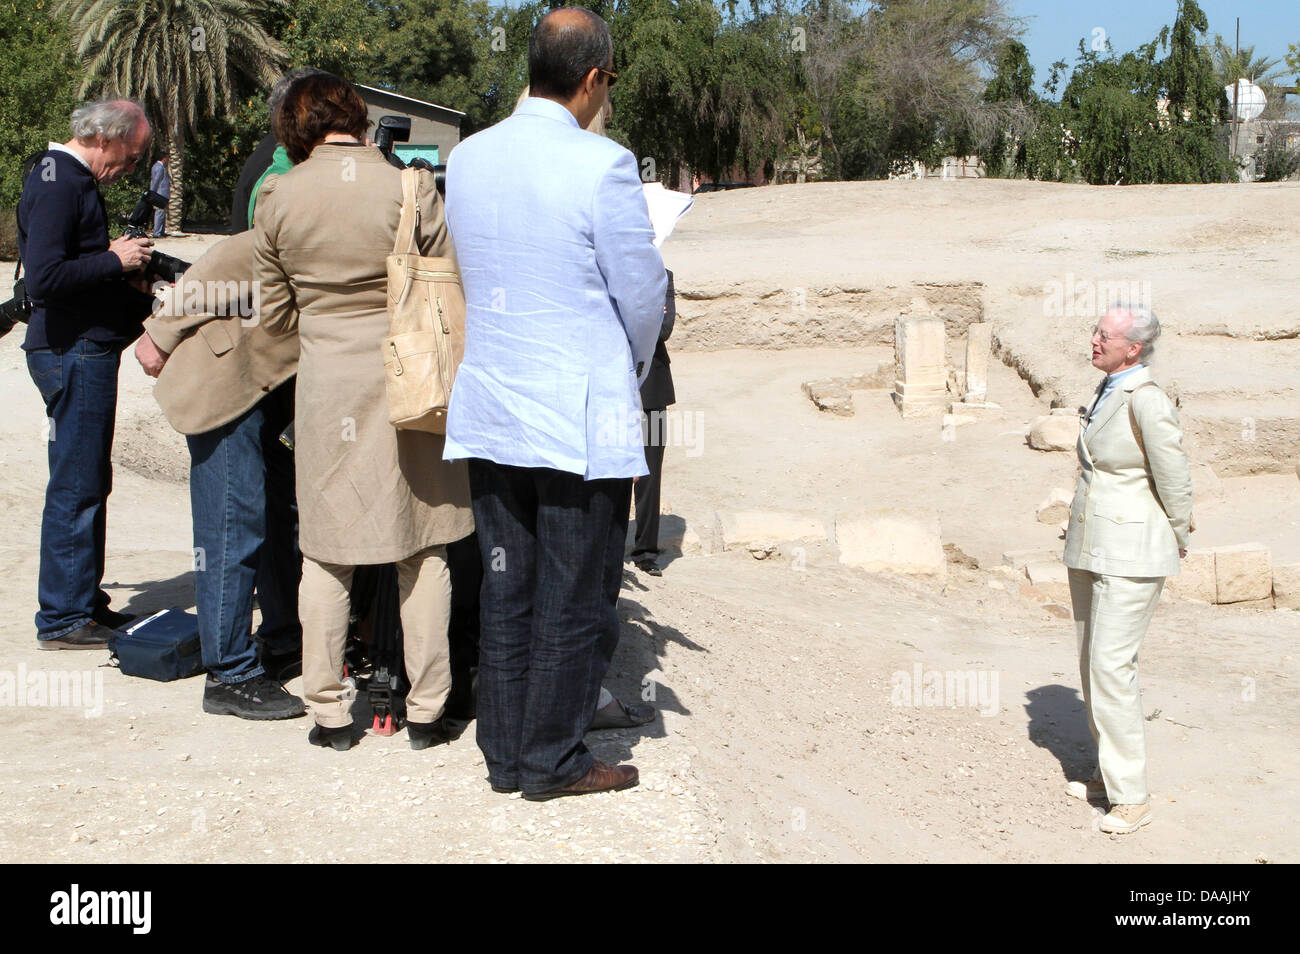 Queen Margrethe II of Denmark visits the site of the Museum and Qala'at Al-Bahrain (the ancient capital of Bahrain) and the Barbar Temple which was built 2,500 BC near Manama, Bahrain, 04 February 2011. The Danish Royal Couple is on state visit to the Kingdom of Bahrain from 03 to 05 February. Photo: Albert Nieboer Photo: RPE-Albert Nieboer (NETHERLANDS OUT) Stock Photo